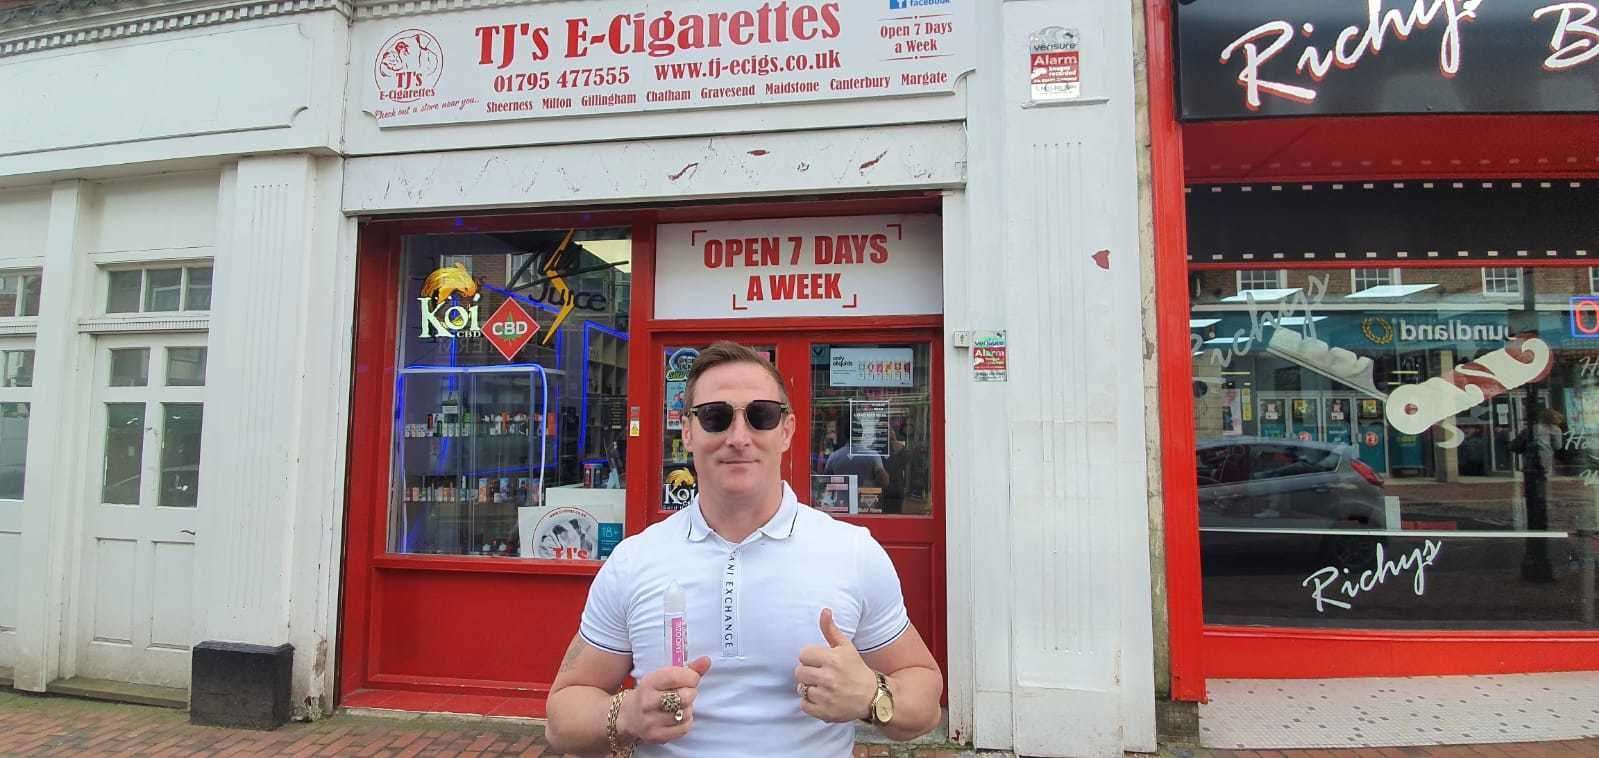 Sittingbourne businessman Terry Utting will be giving out free hand sanitiser to customers aged 50 and over at his vape shops from Friday